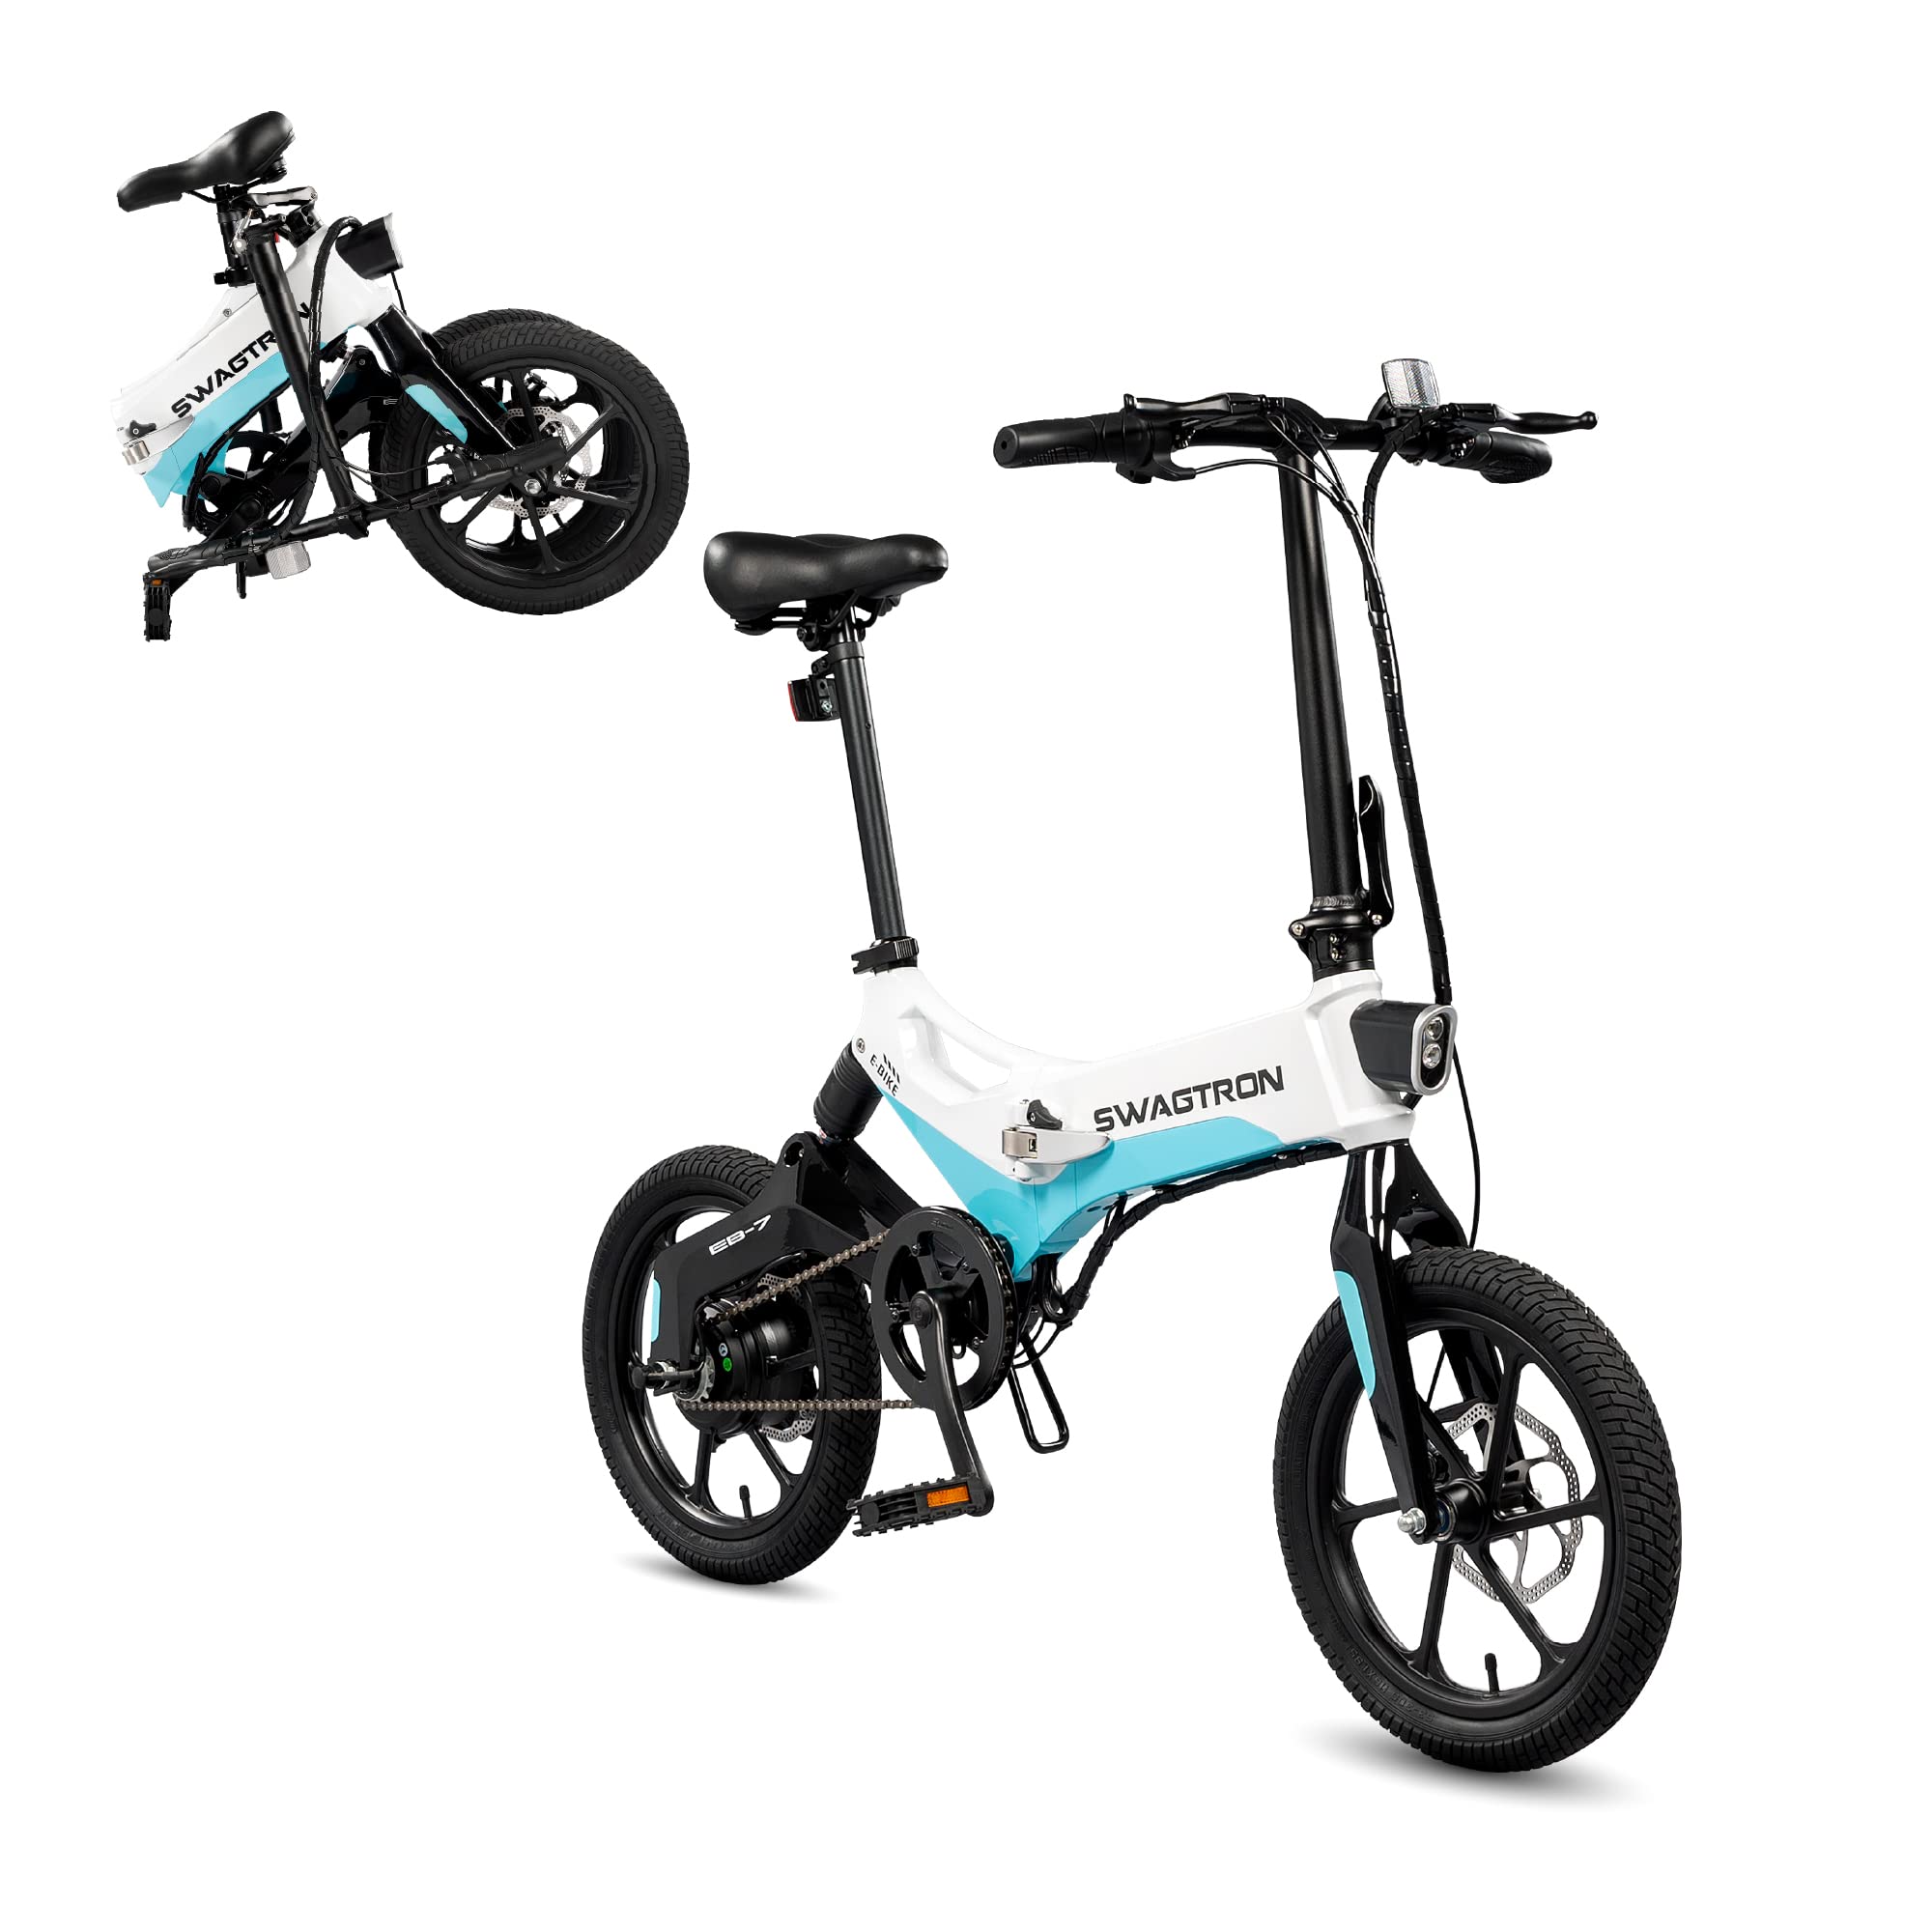 Swagtron Swagcycle EB-7 Elite Folding Electric Bike with Removable Battery and Rear Suspension BlueWhite 16 Wheels